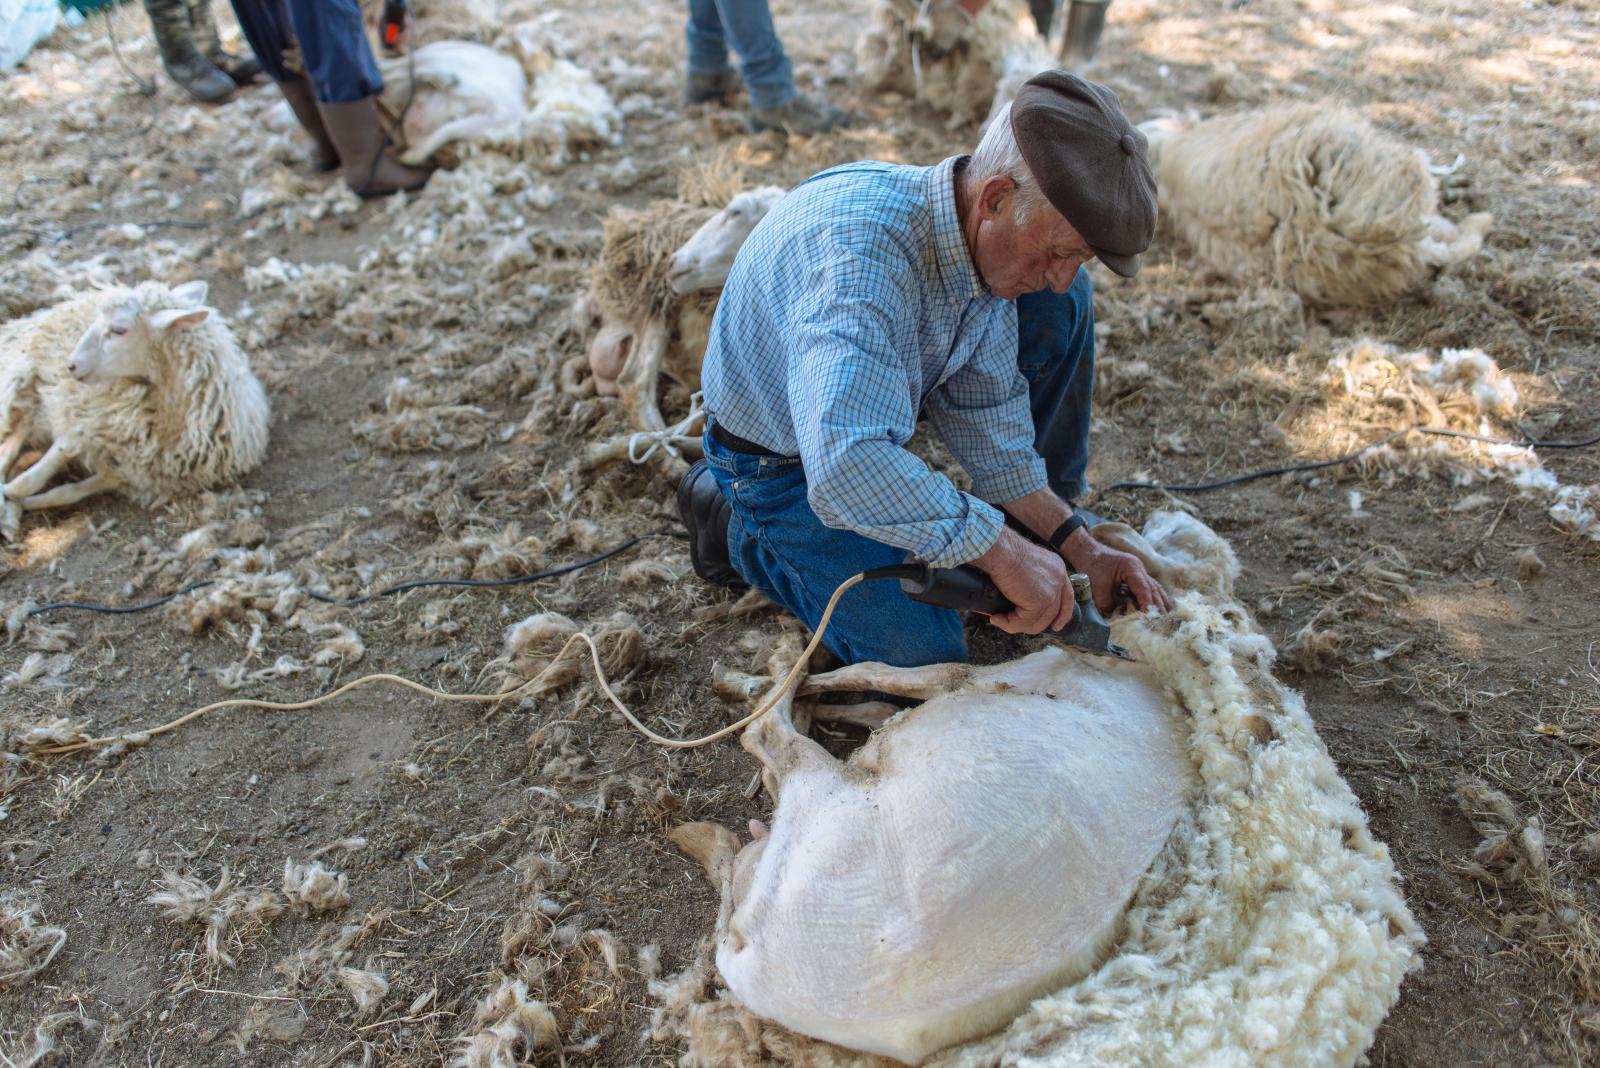 A Carusa - traditional sheep shearing in Calabria | Buy this image